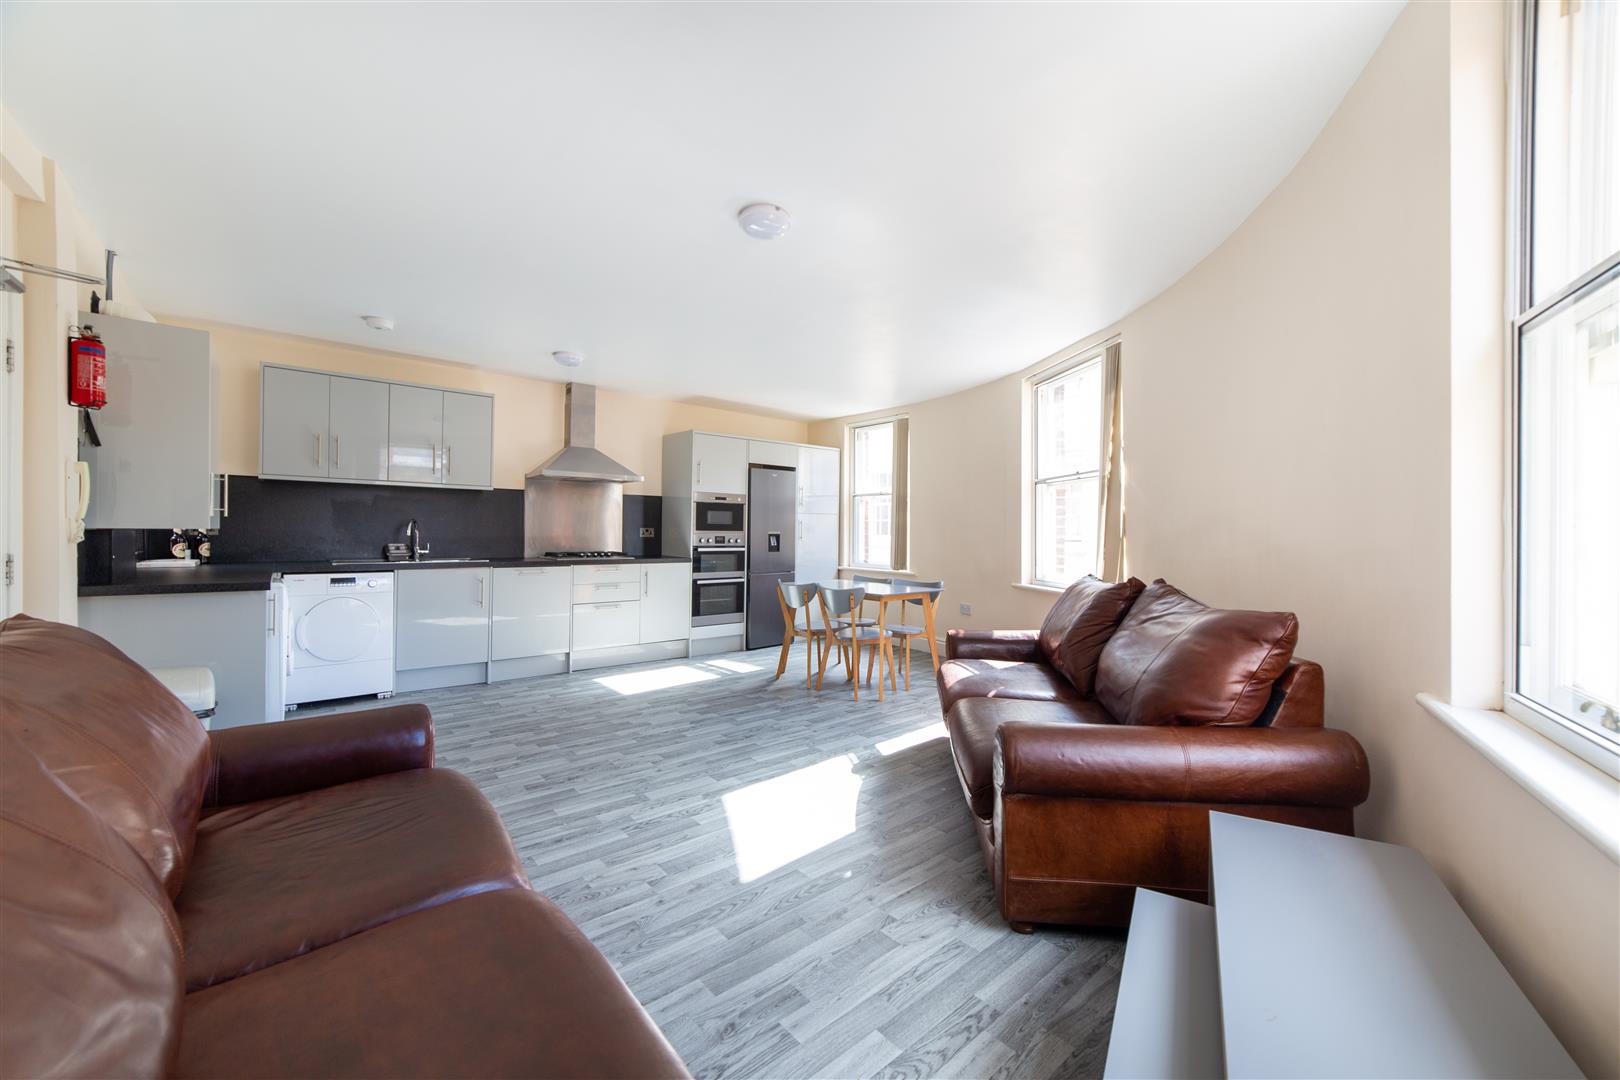 4 bed apartment to rent in Fenkle Street, Newcastle Upon Tyne - Property Image 1